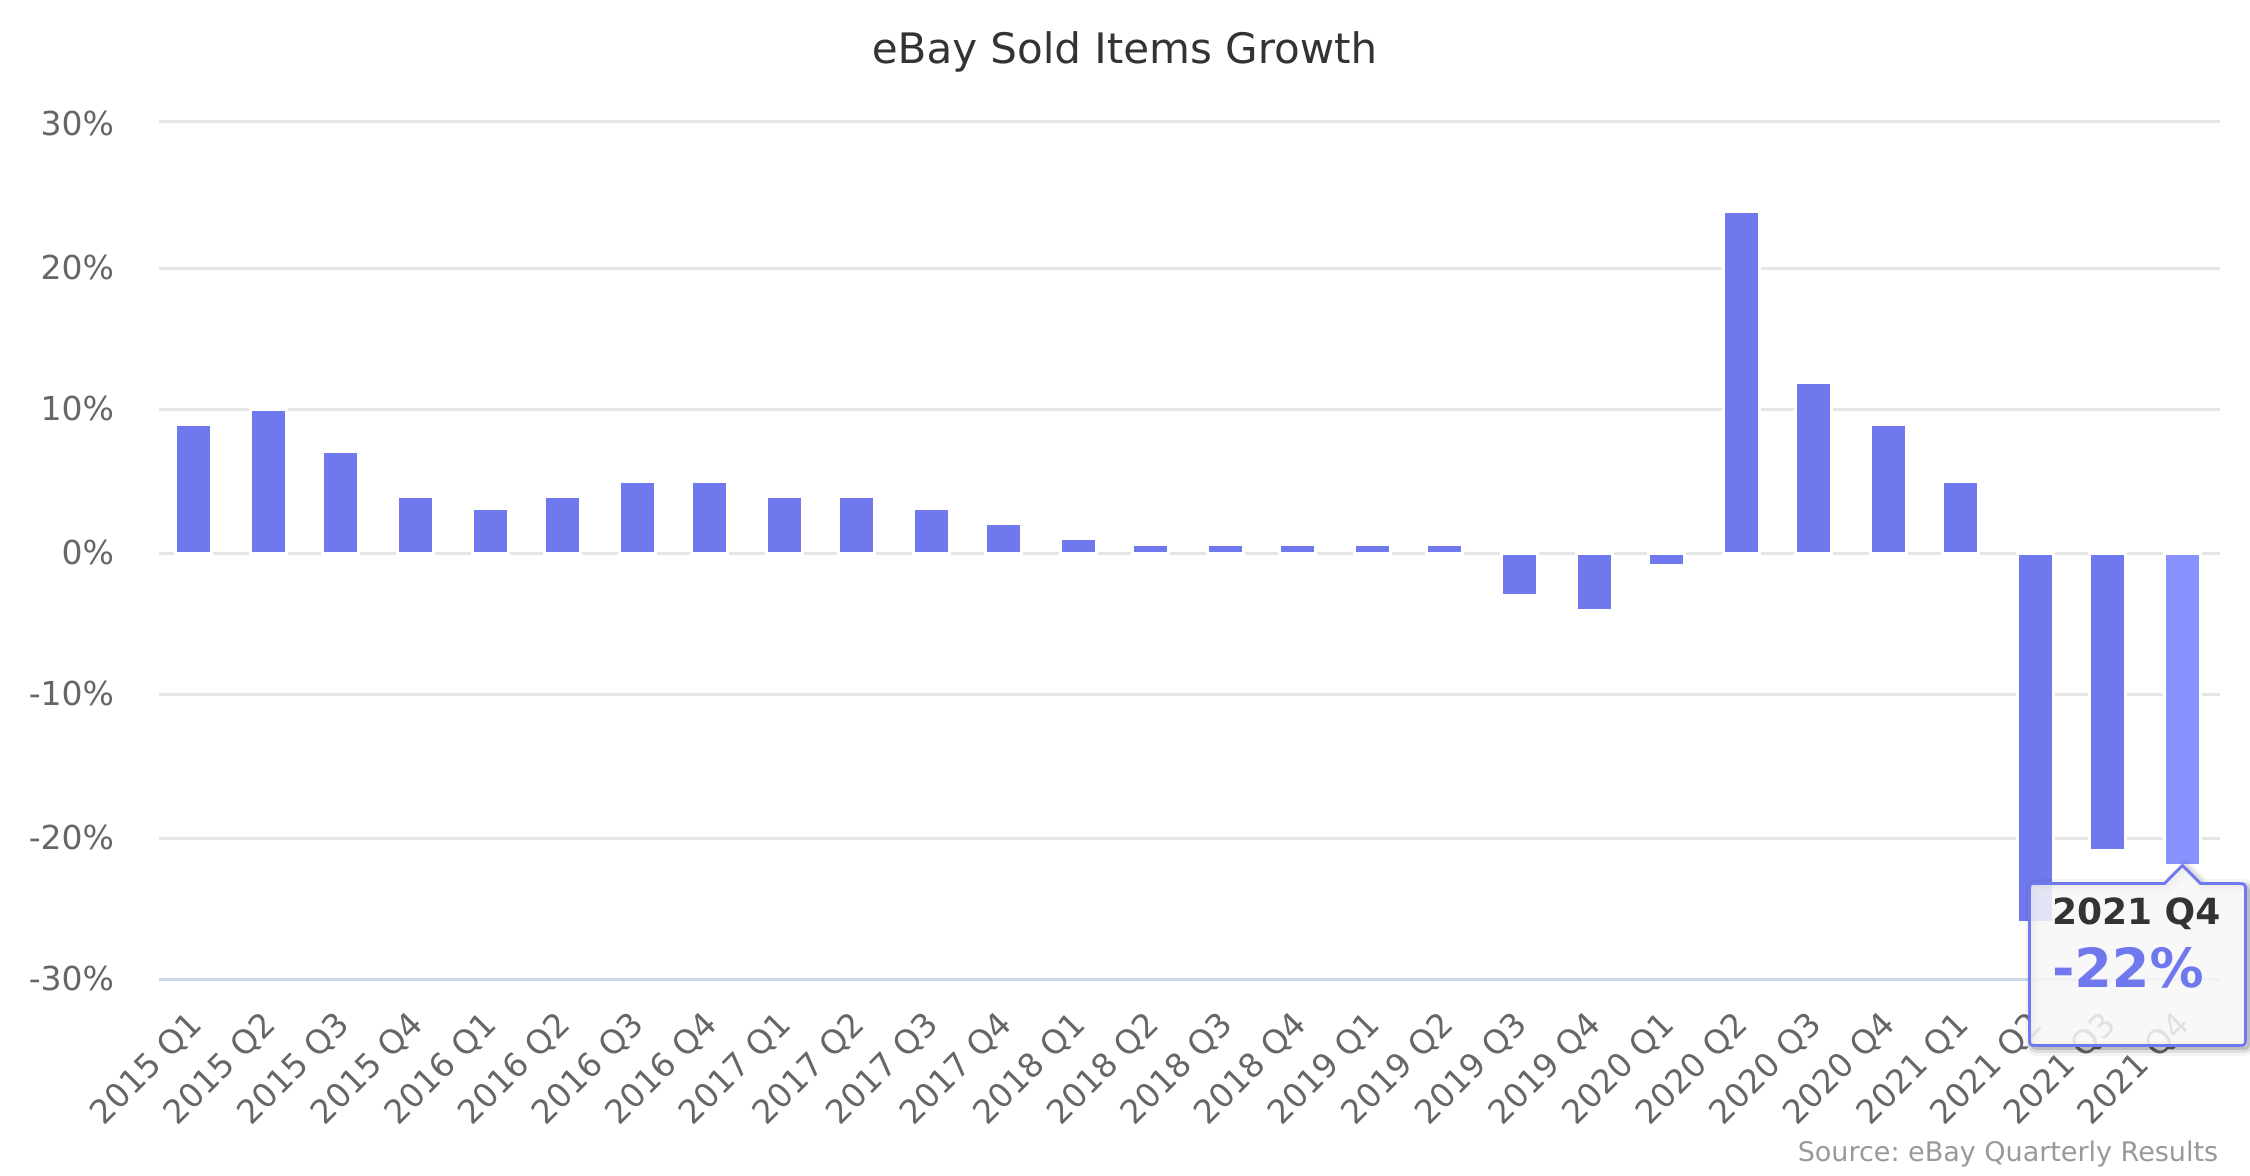 eBay Sold Items Growth 2015-2021